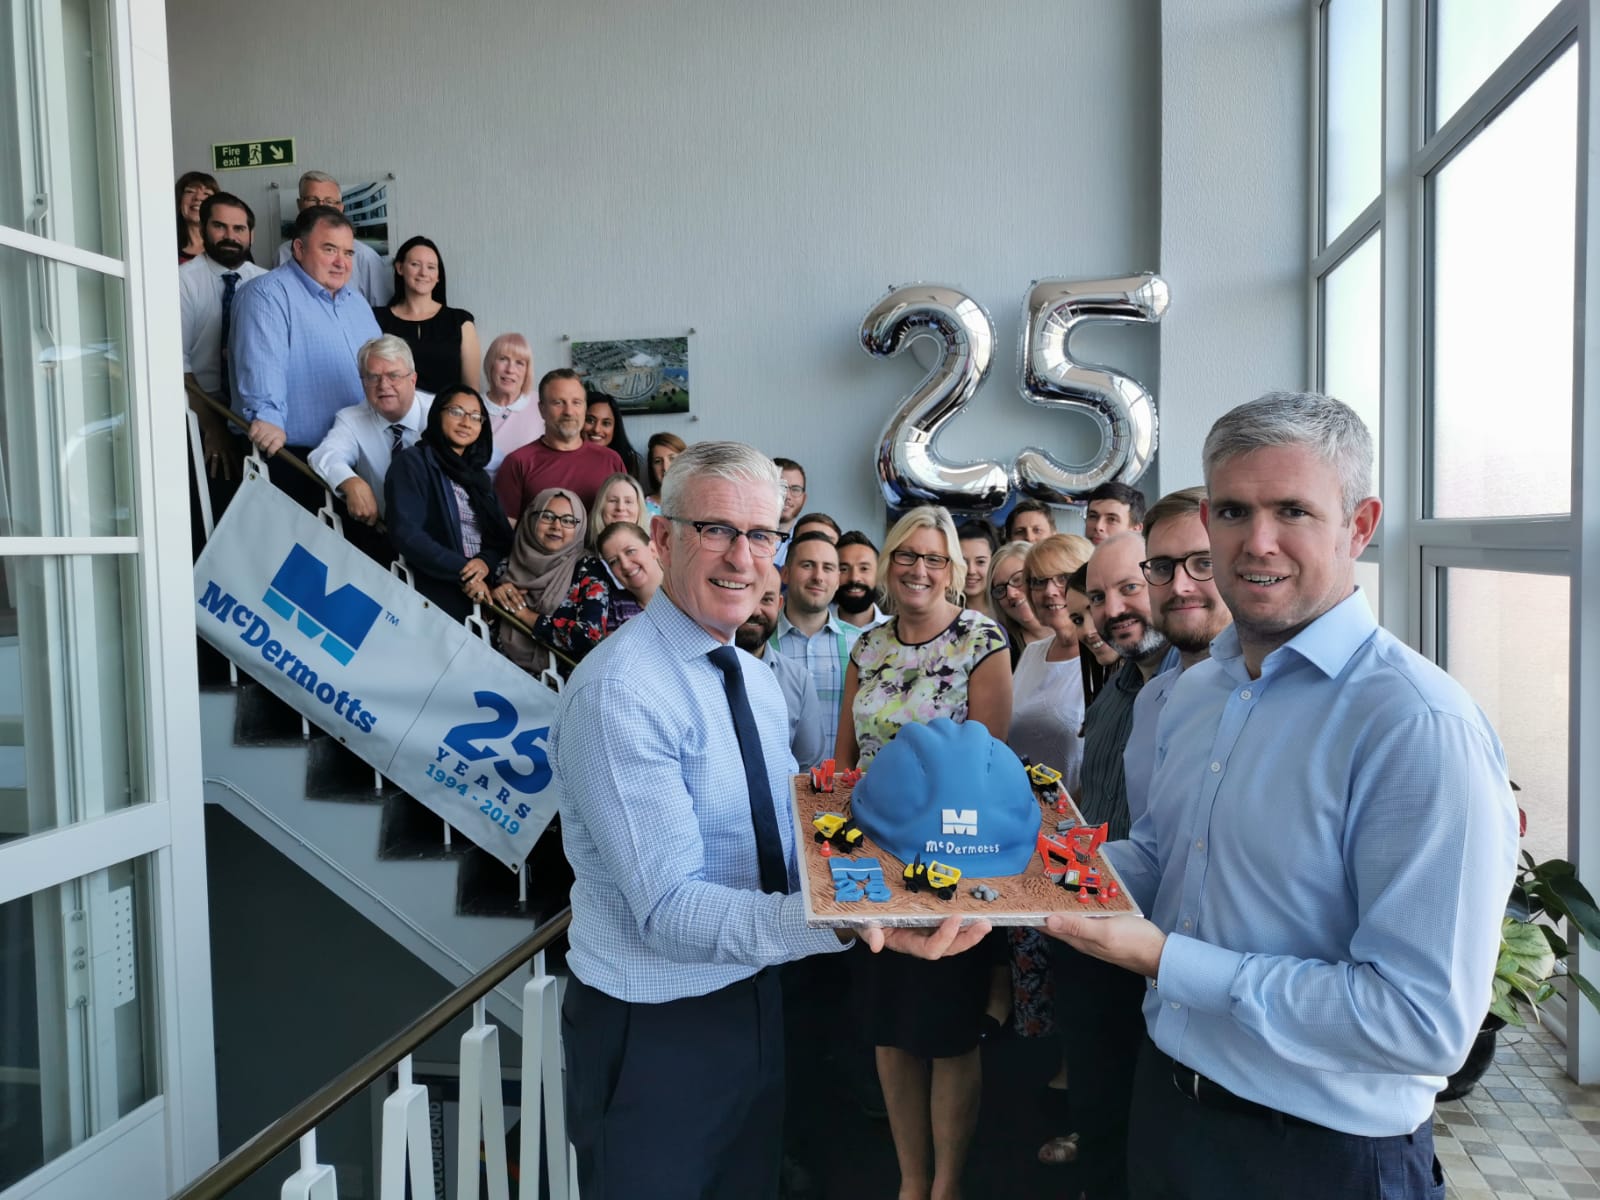 McDermotts was founded in August 1994, so to celebrate our birthday month we organised daytime celebrations for our colleagues across all of our sites and head office.